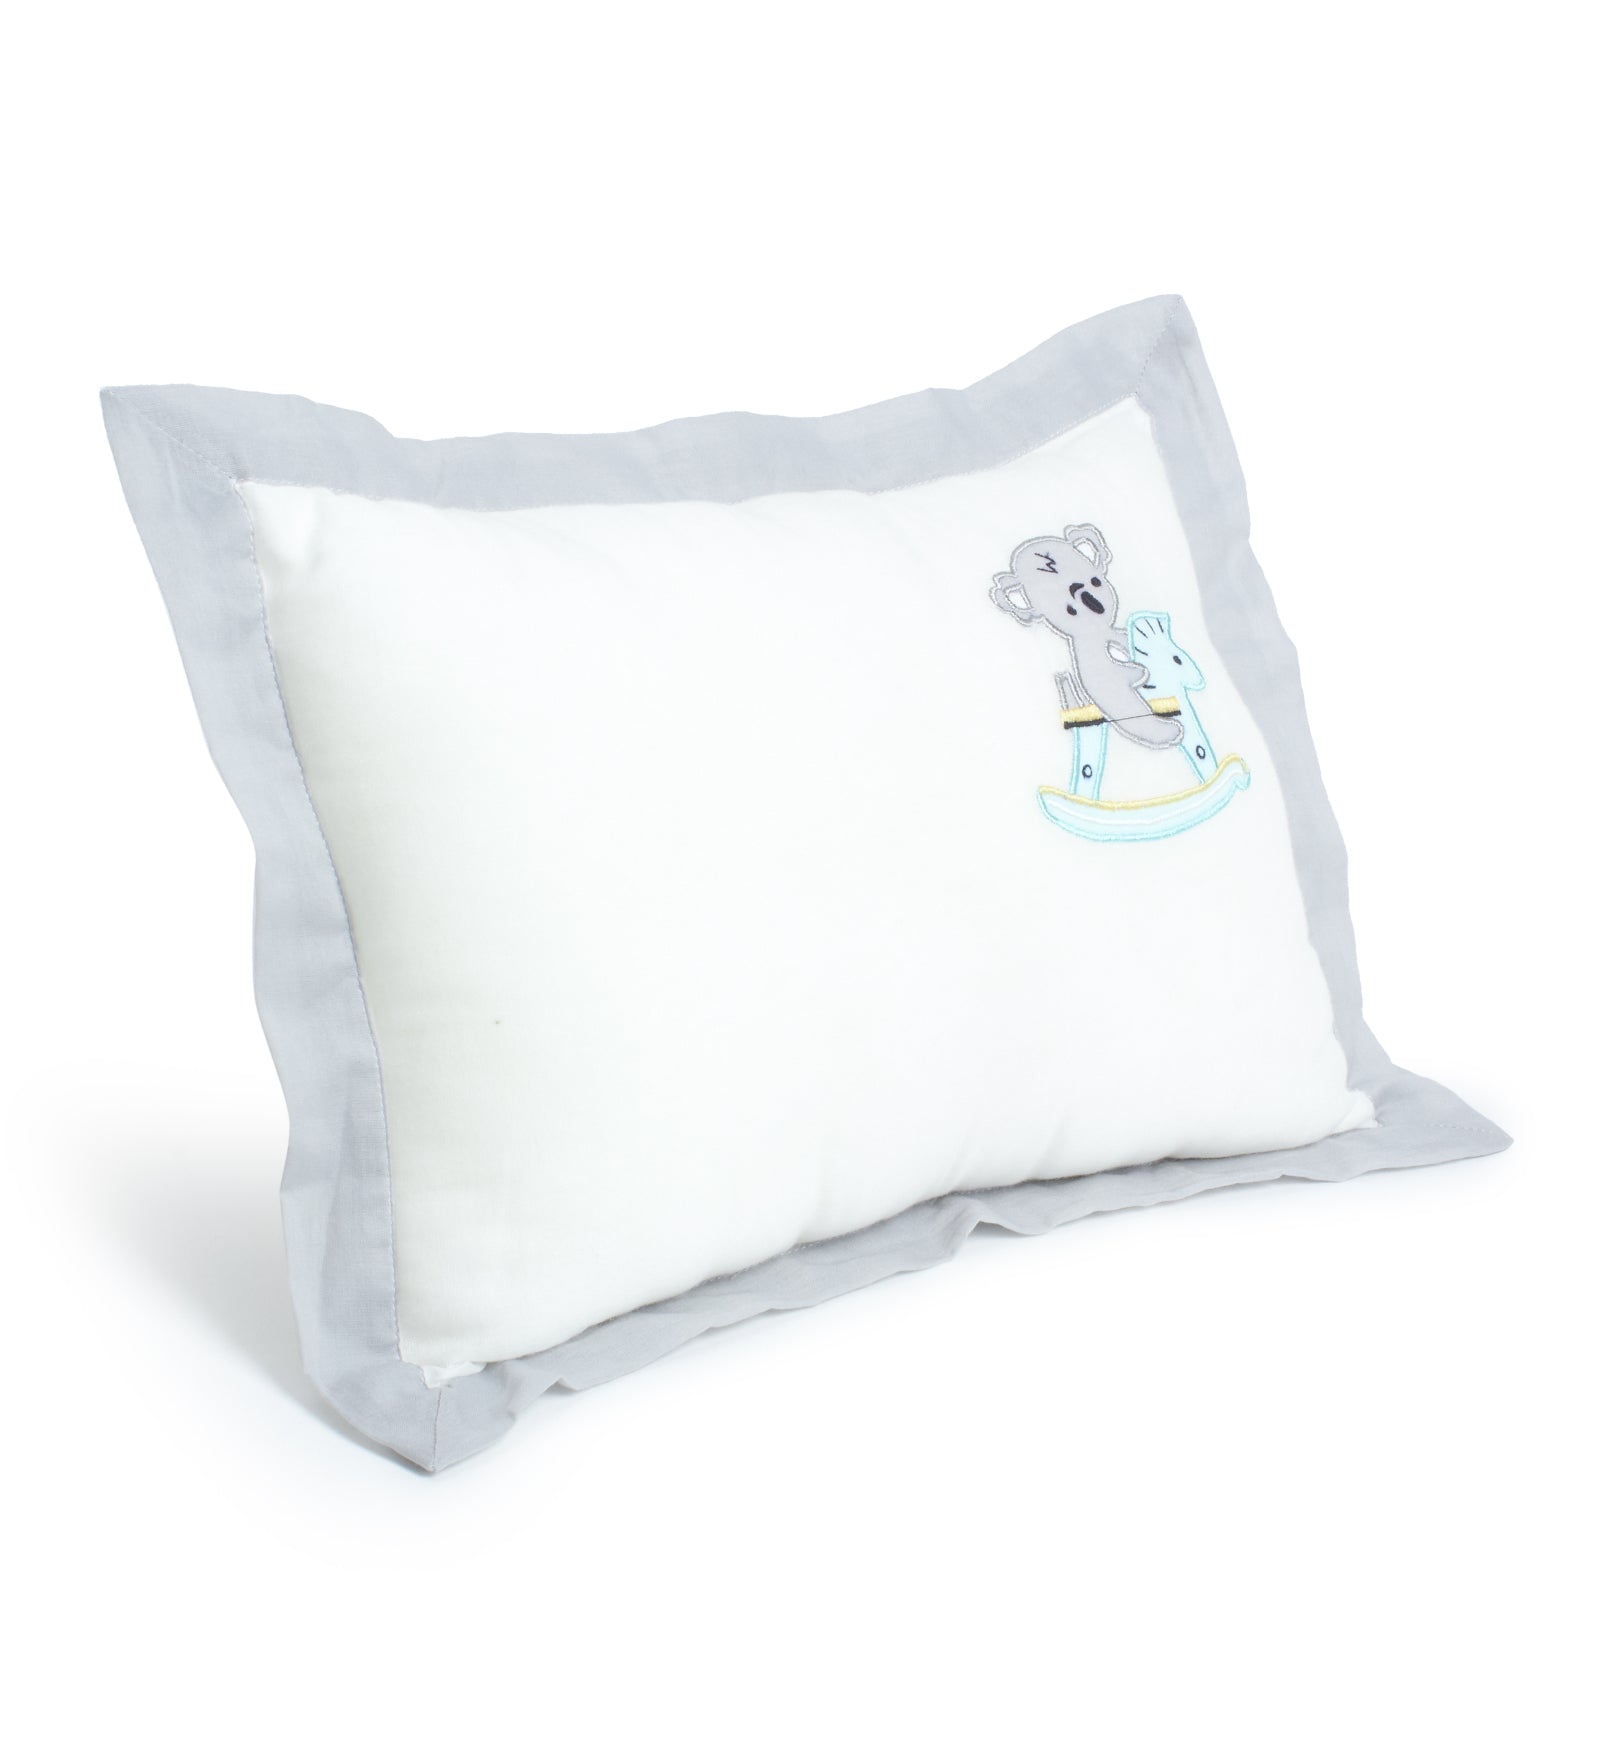 The White Cradle Cot Pillow + 2 Bolsters Set with Fillers - Organic Cotton Fabric, Softest Fiber Filling, Protective Comfort - Koala